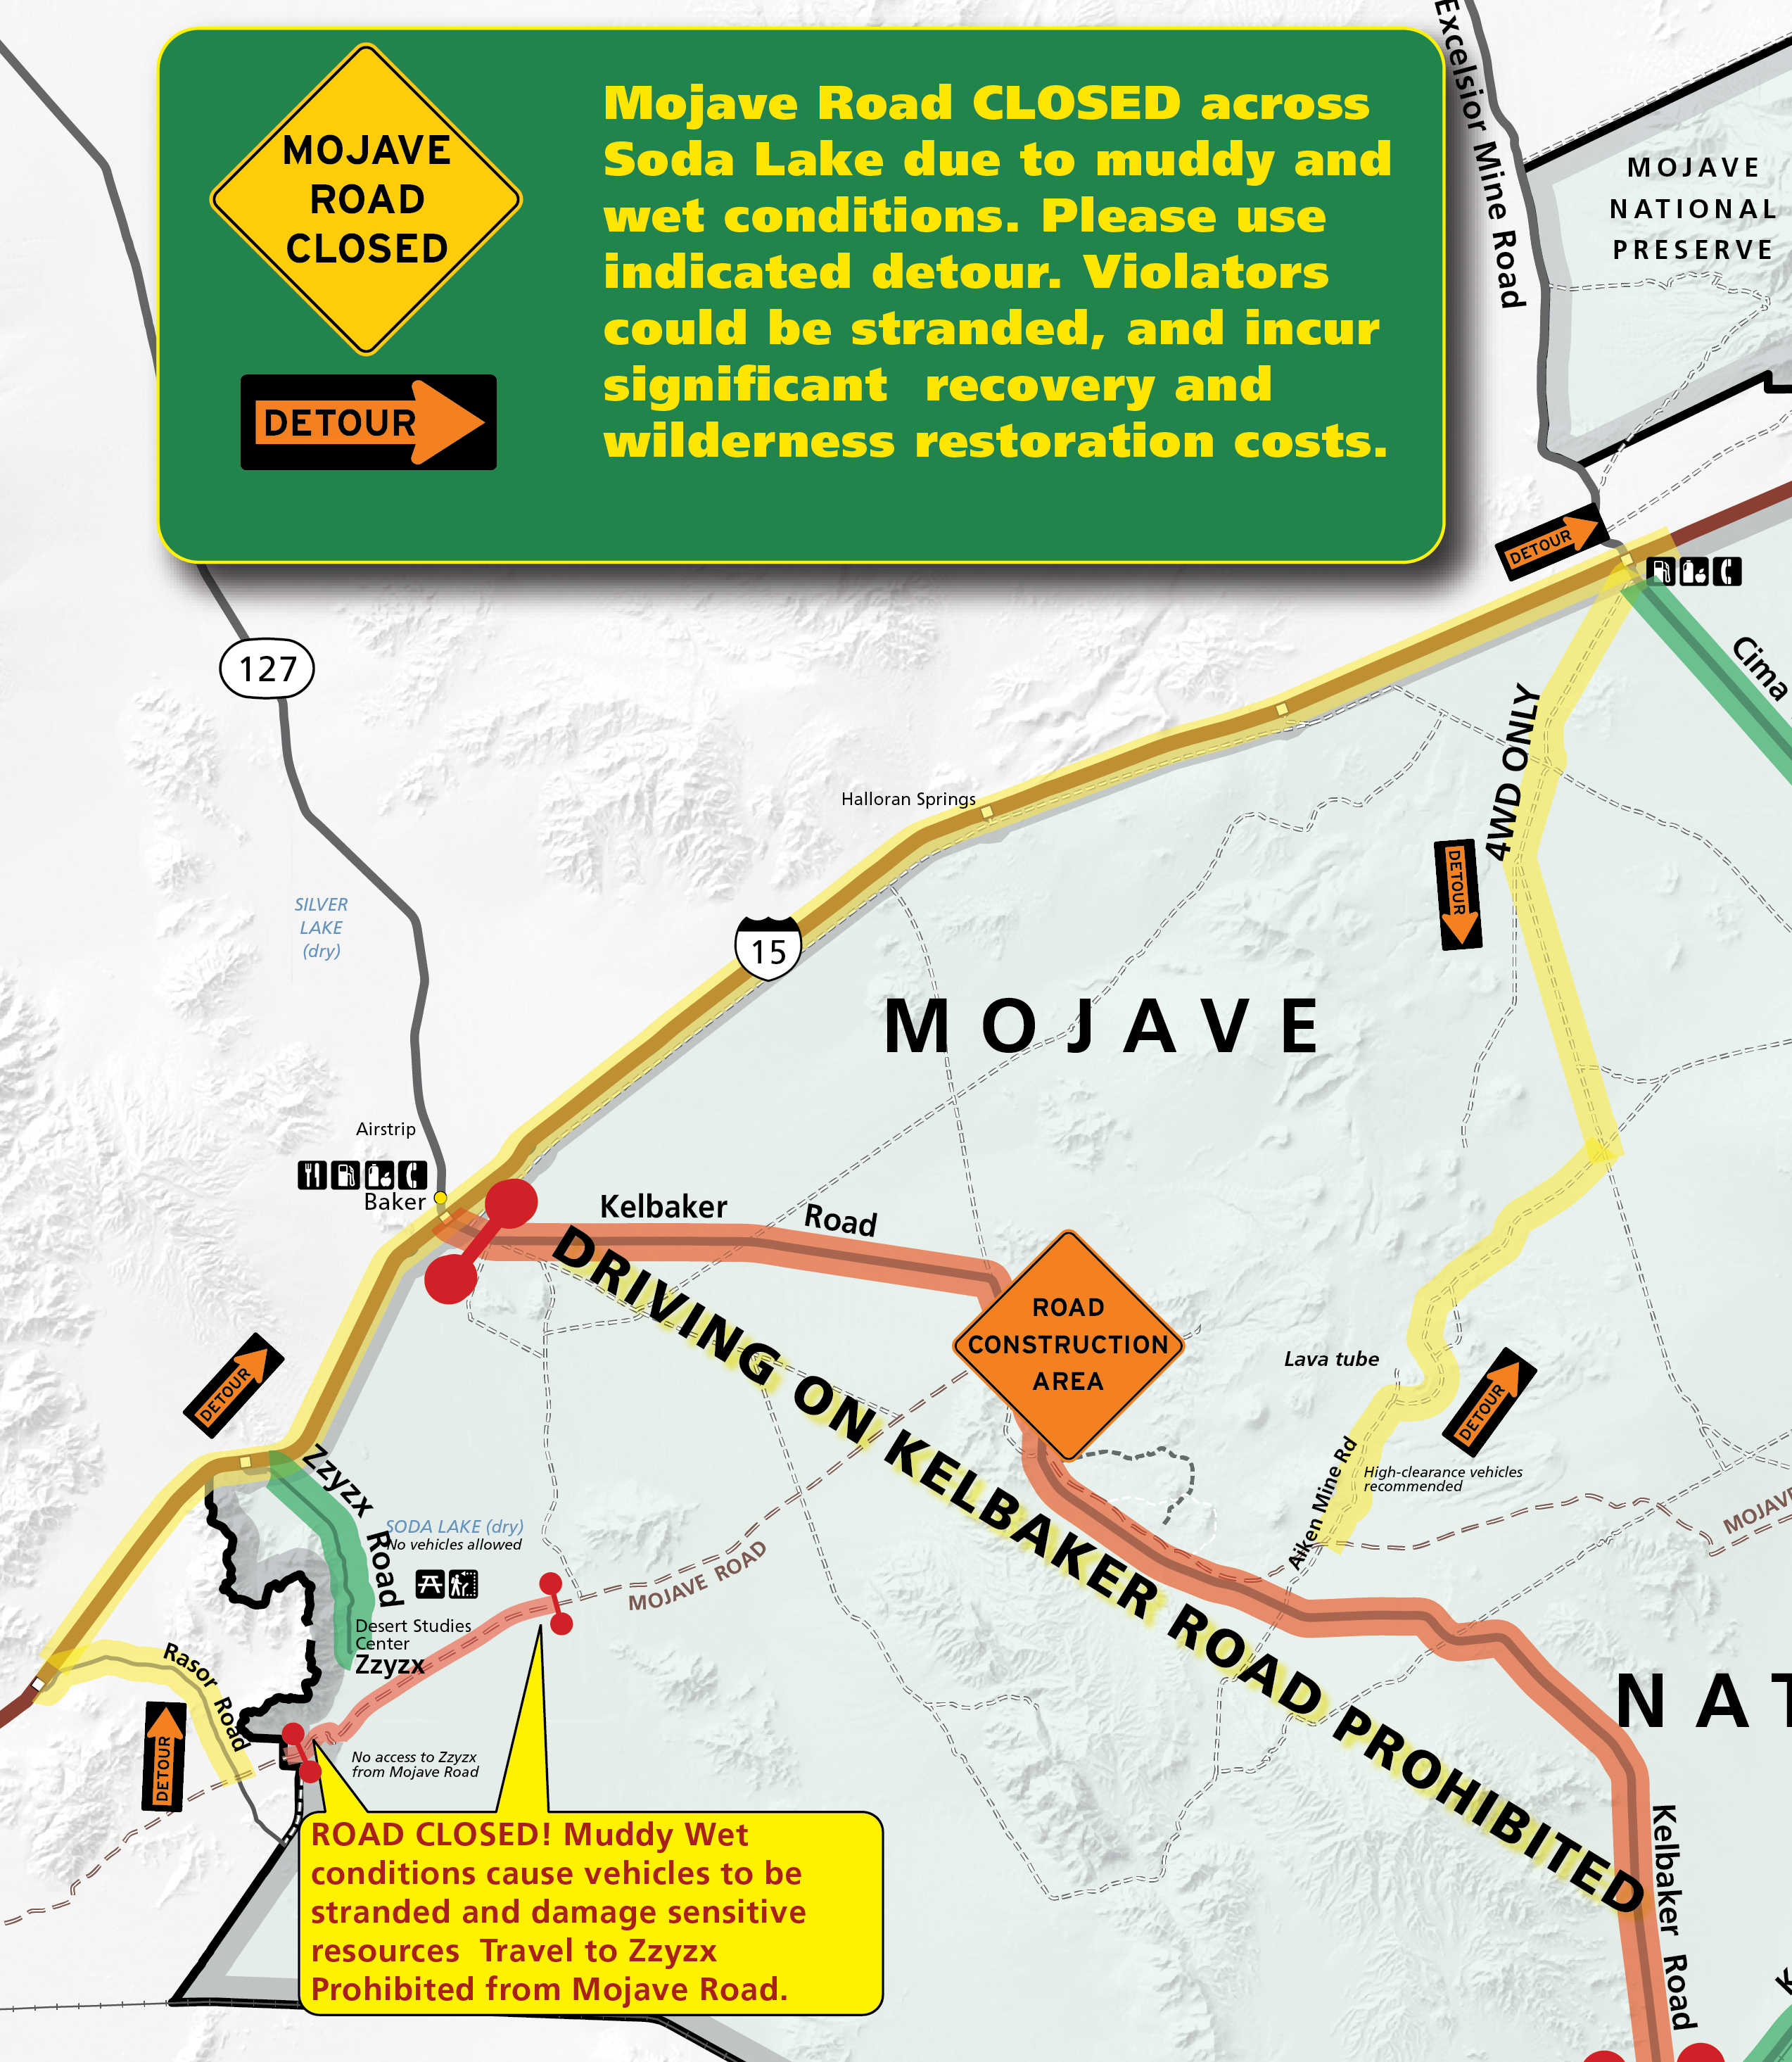 Detour map for Mojave Road, highlighting Rasor Rd, Interstate 15, Cima Road, and Aiken Mine Road as a detor around the closed soda lake section of the Mojave Road